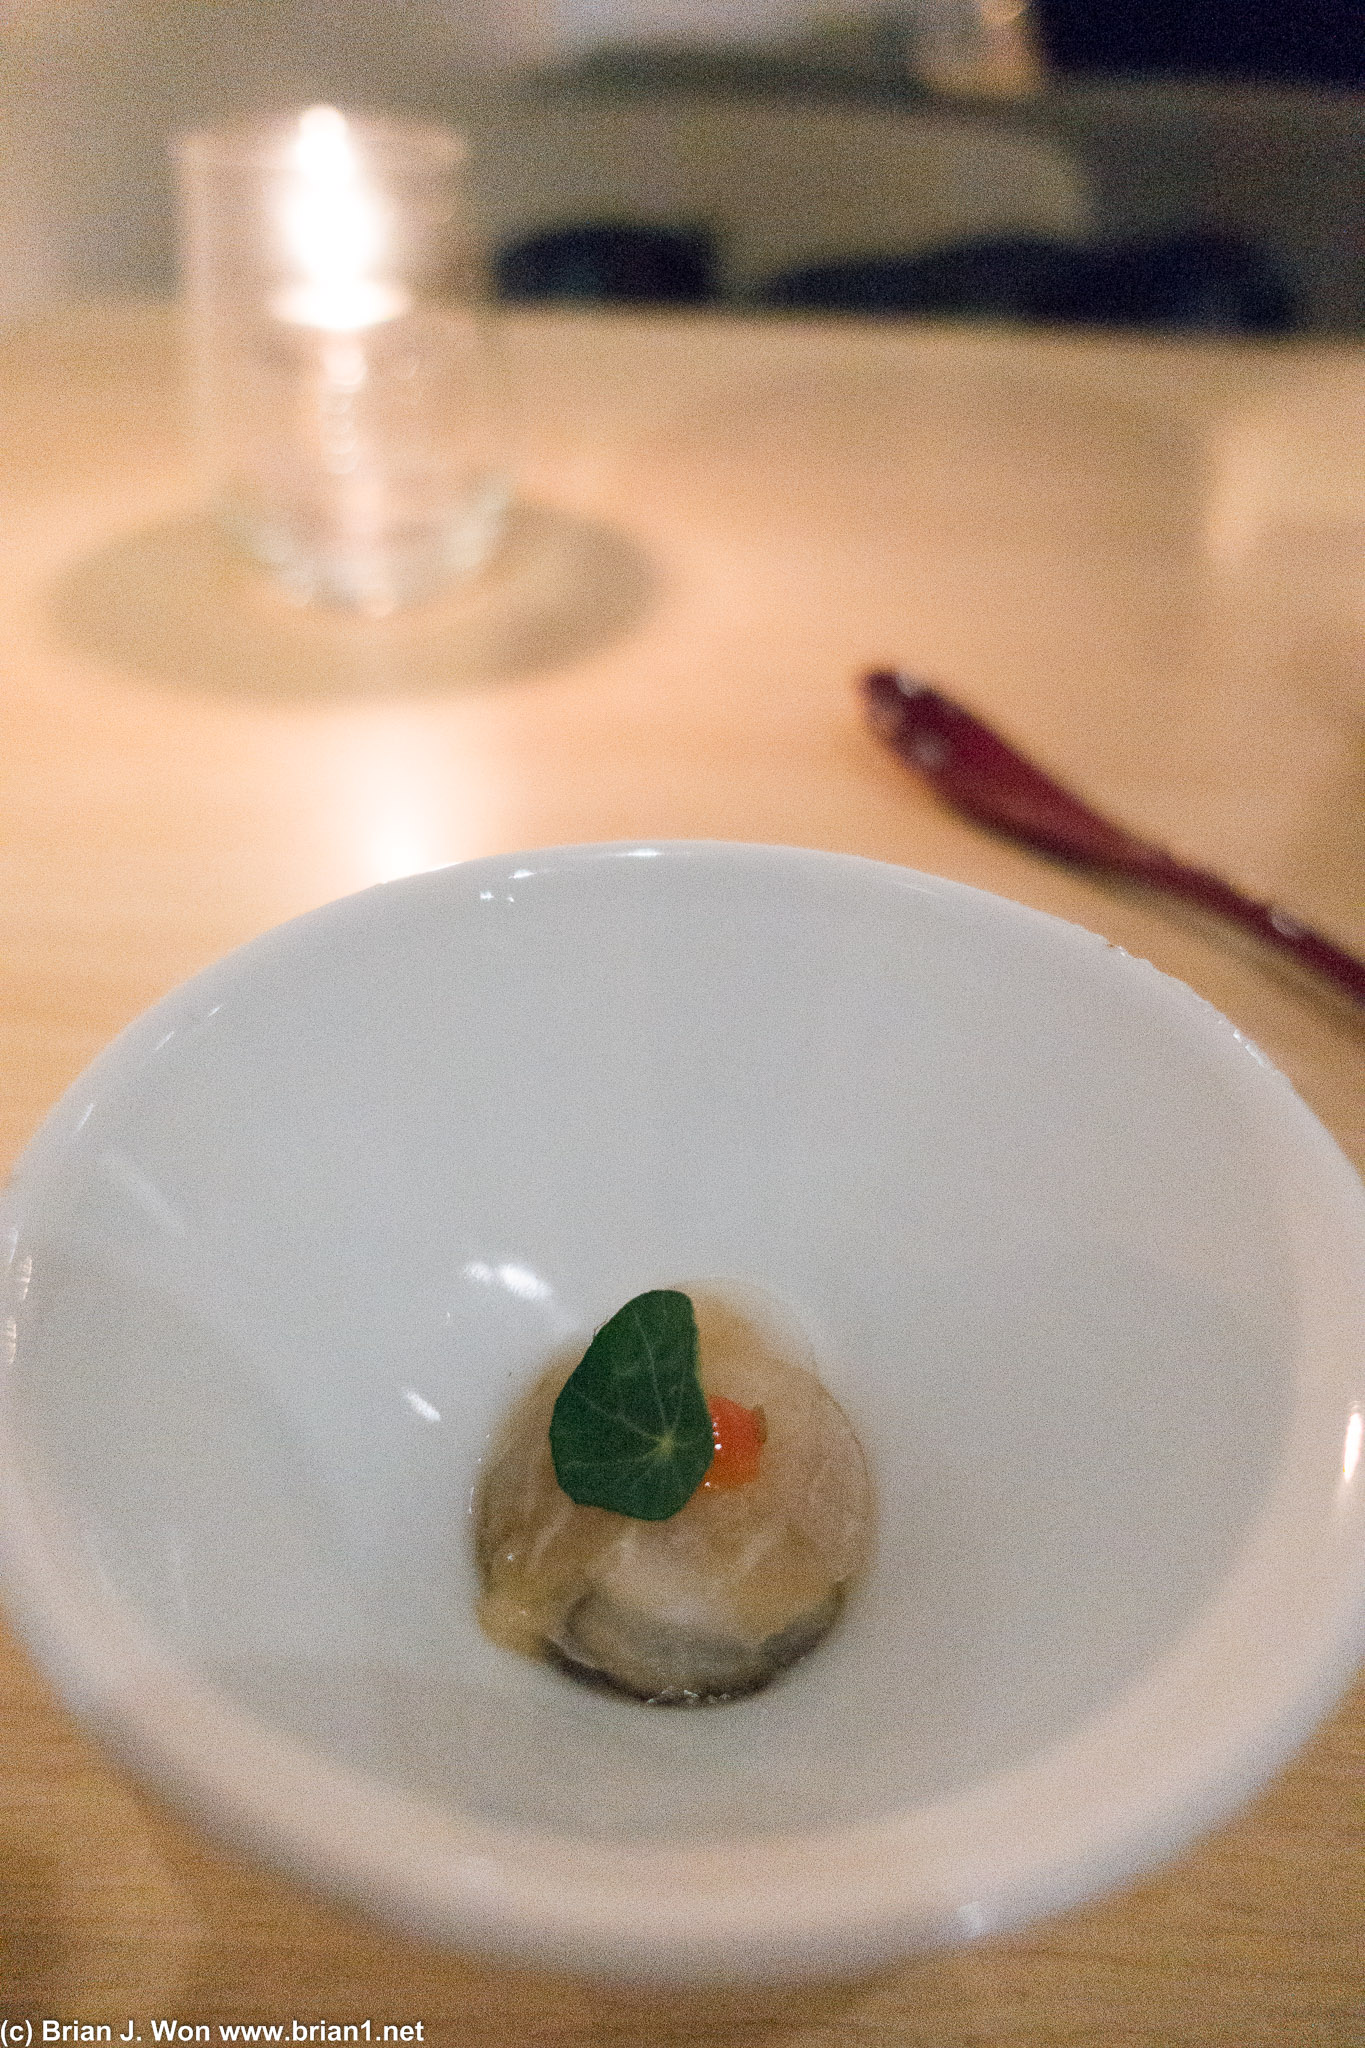 Kyushu oyster with fermented daikon and chili paste. Delicate, unusual in an oyster, but all of one bite.